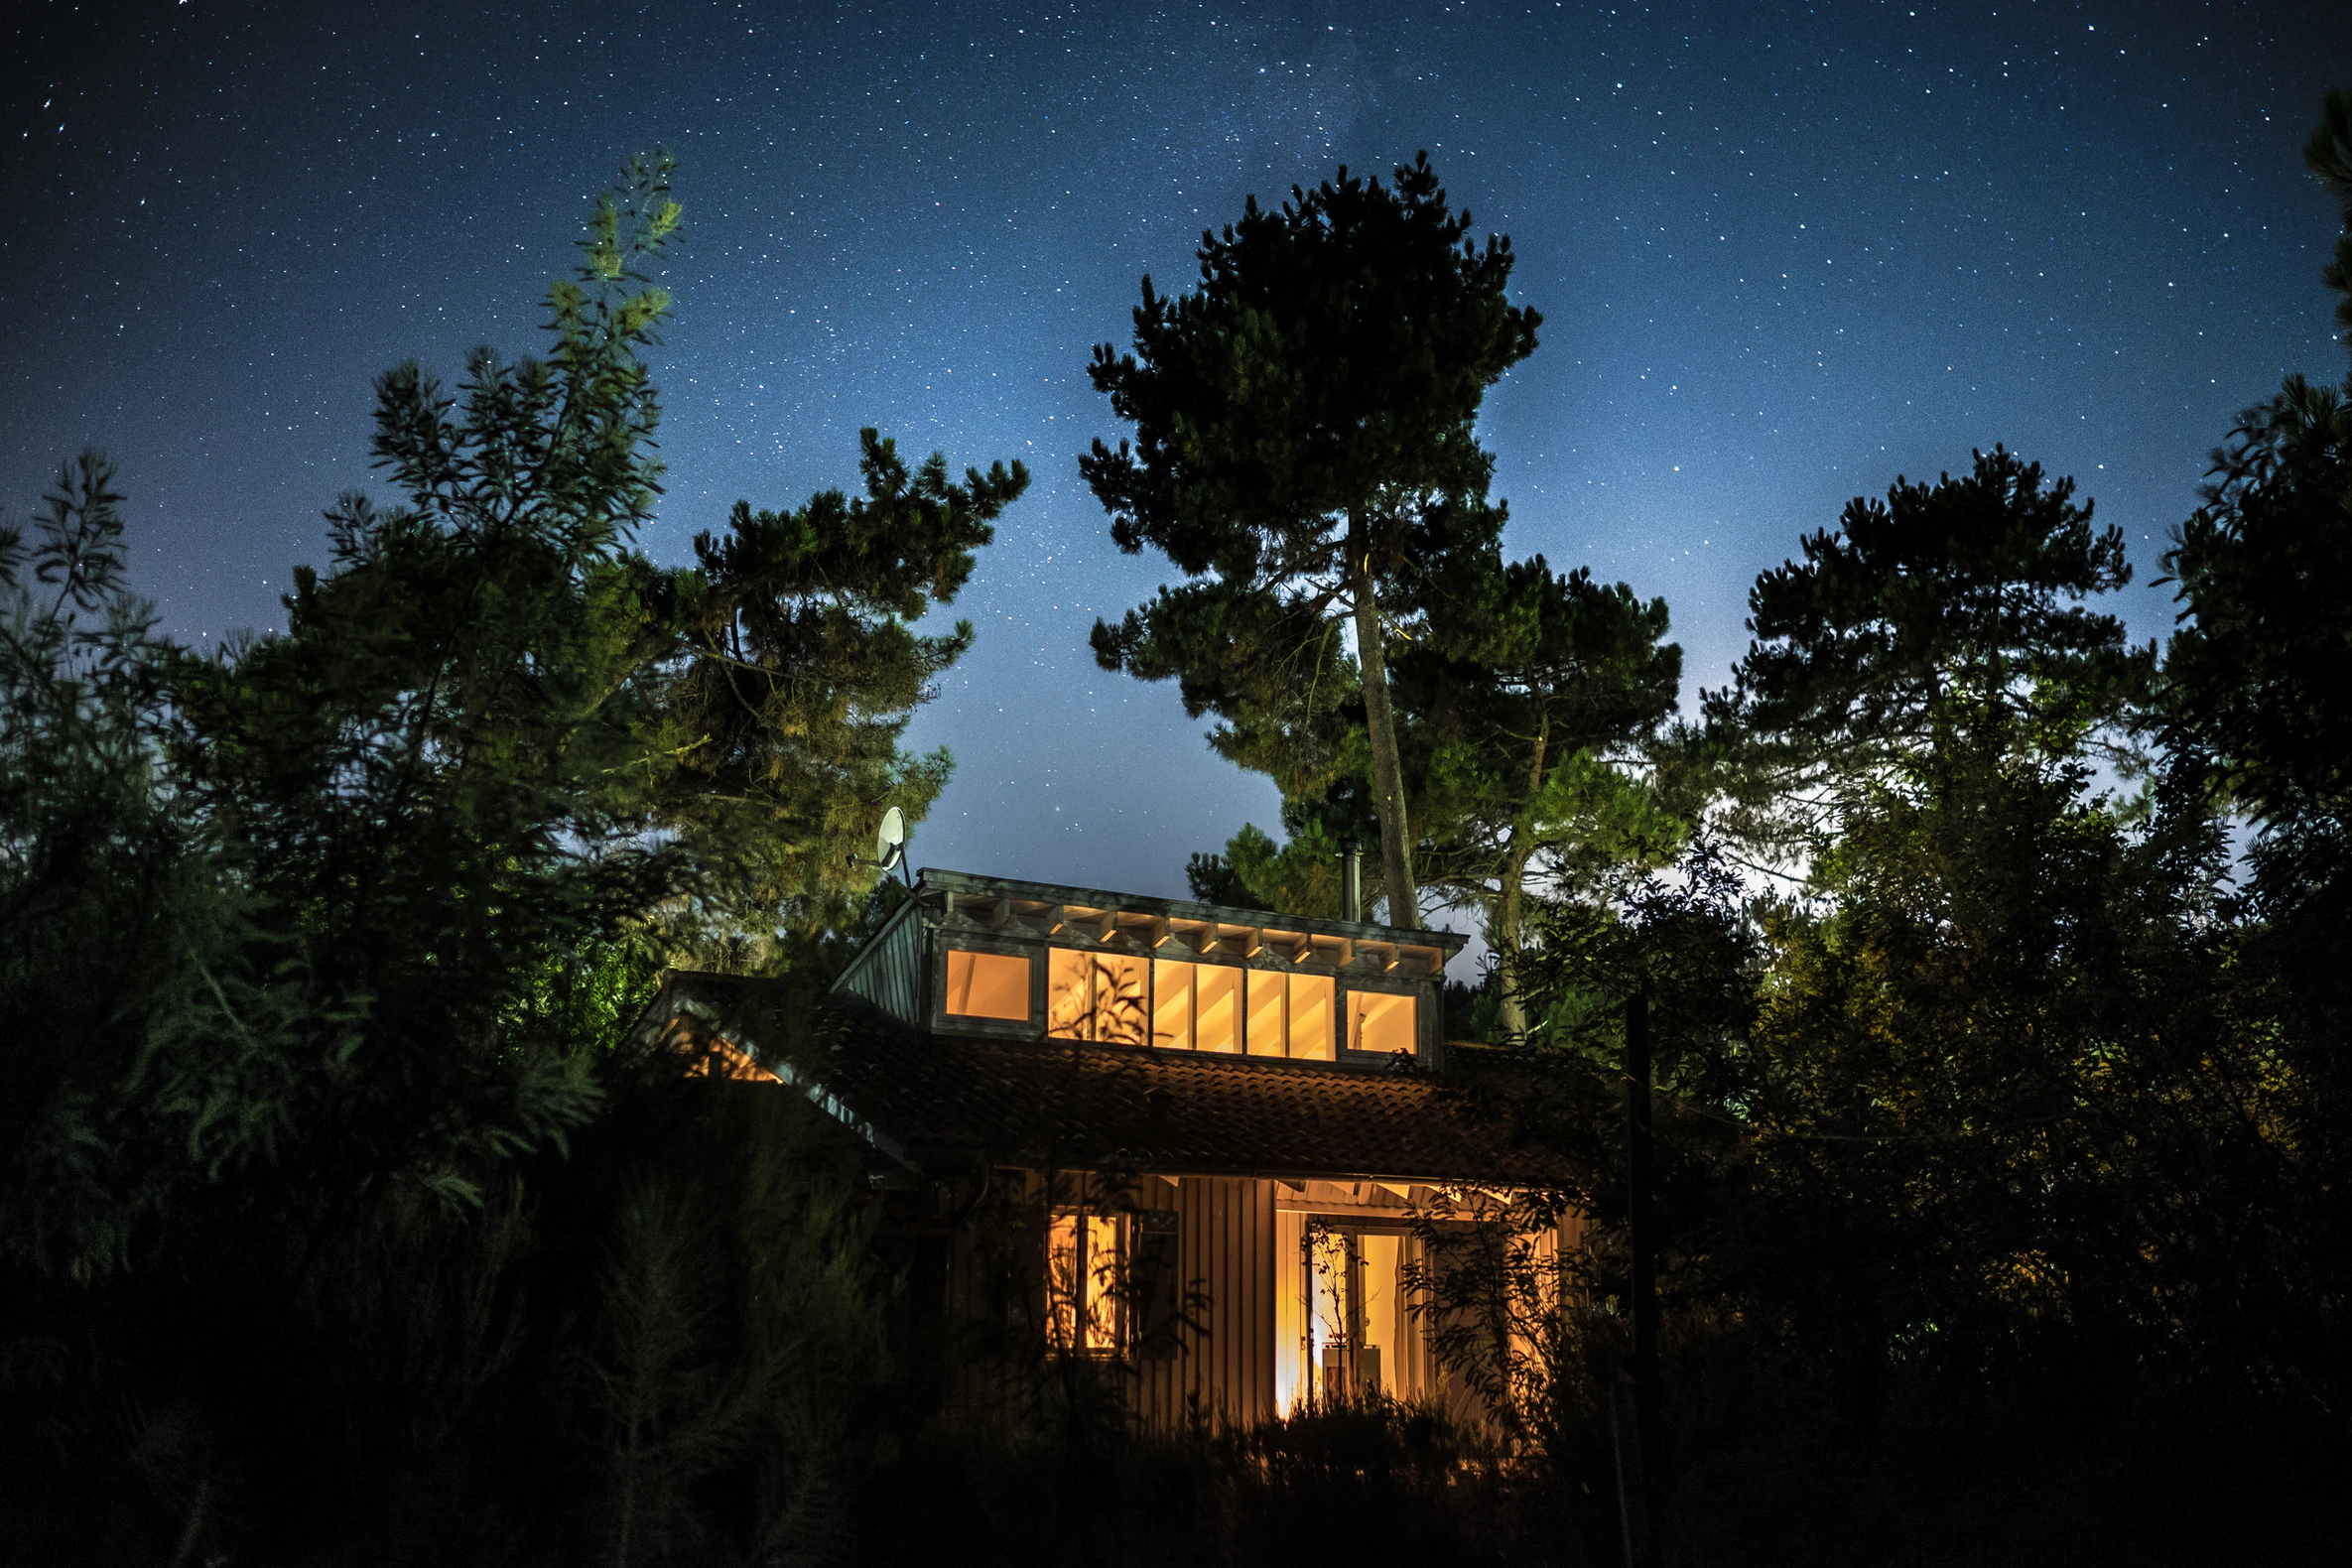 A house in the woods with the stars visible in the sky above.